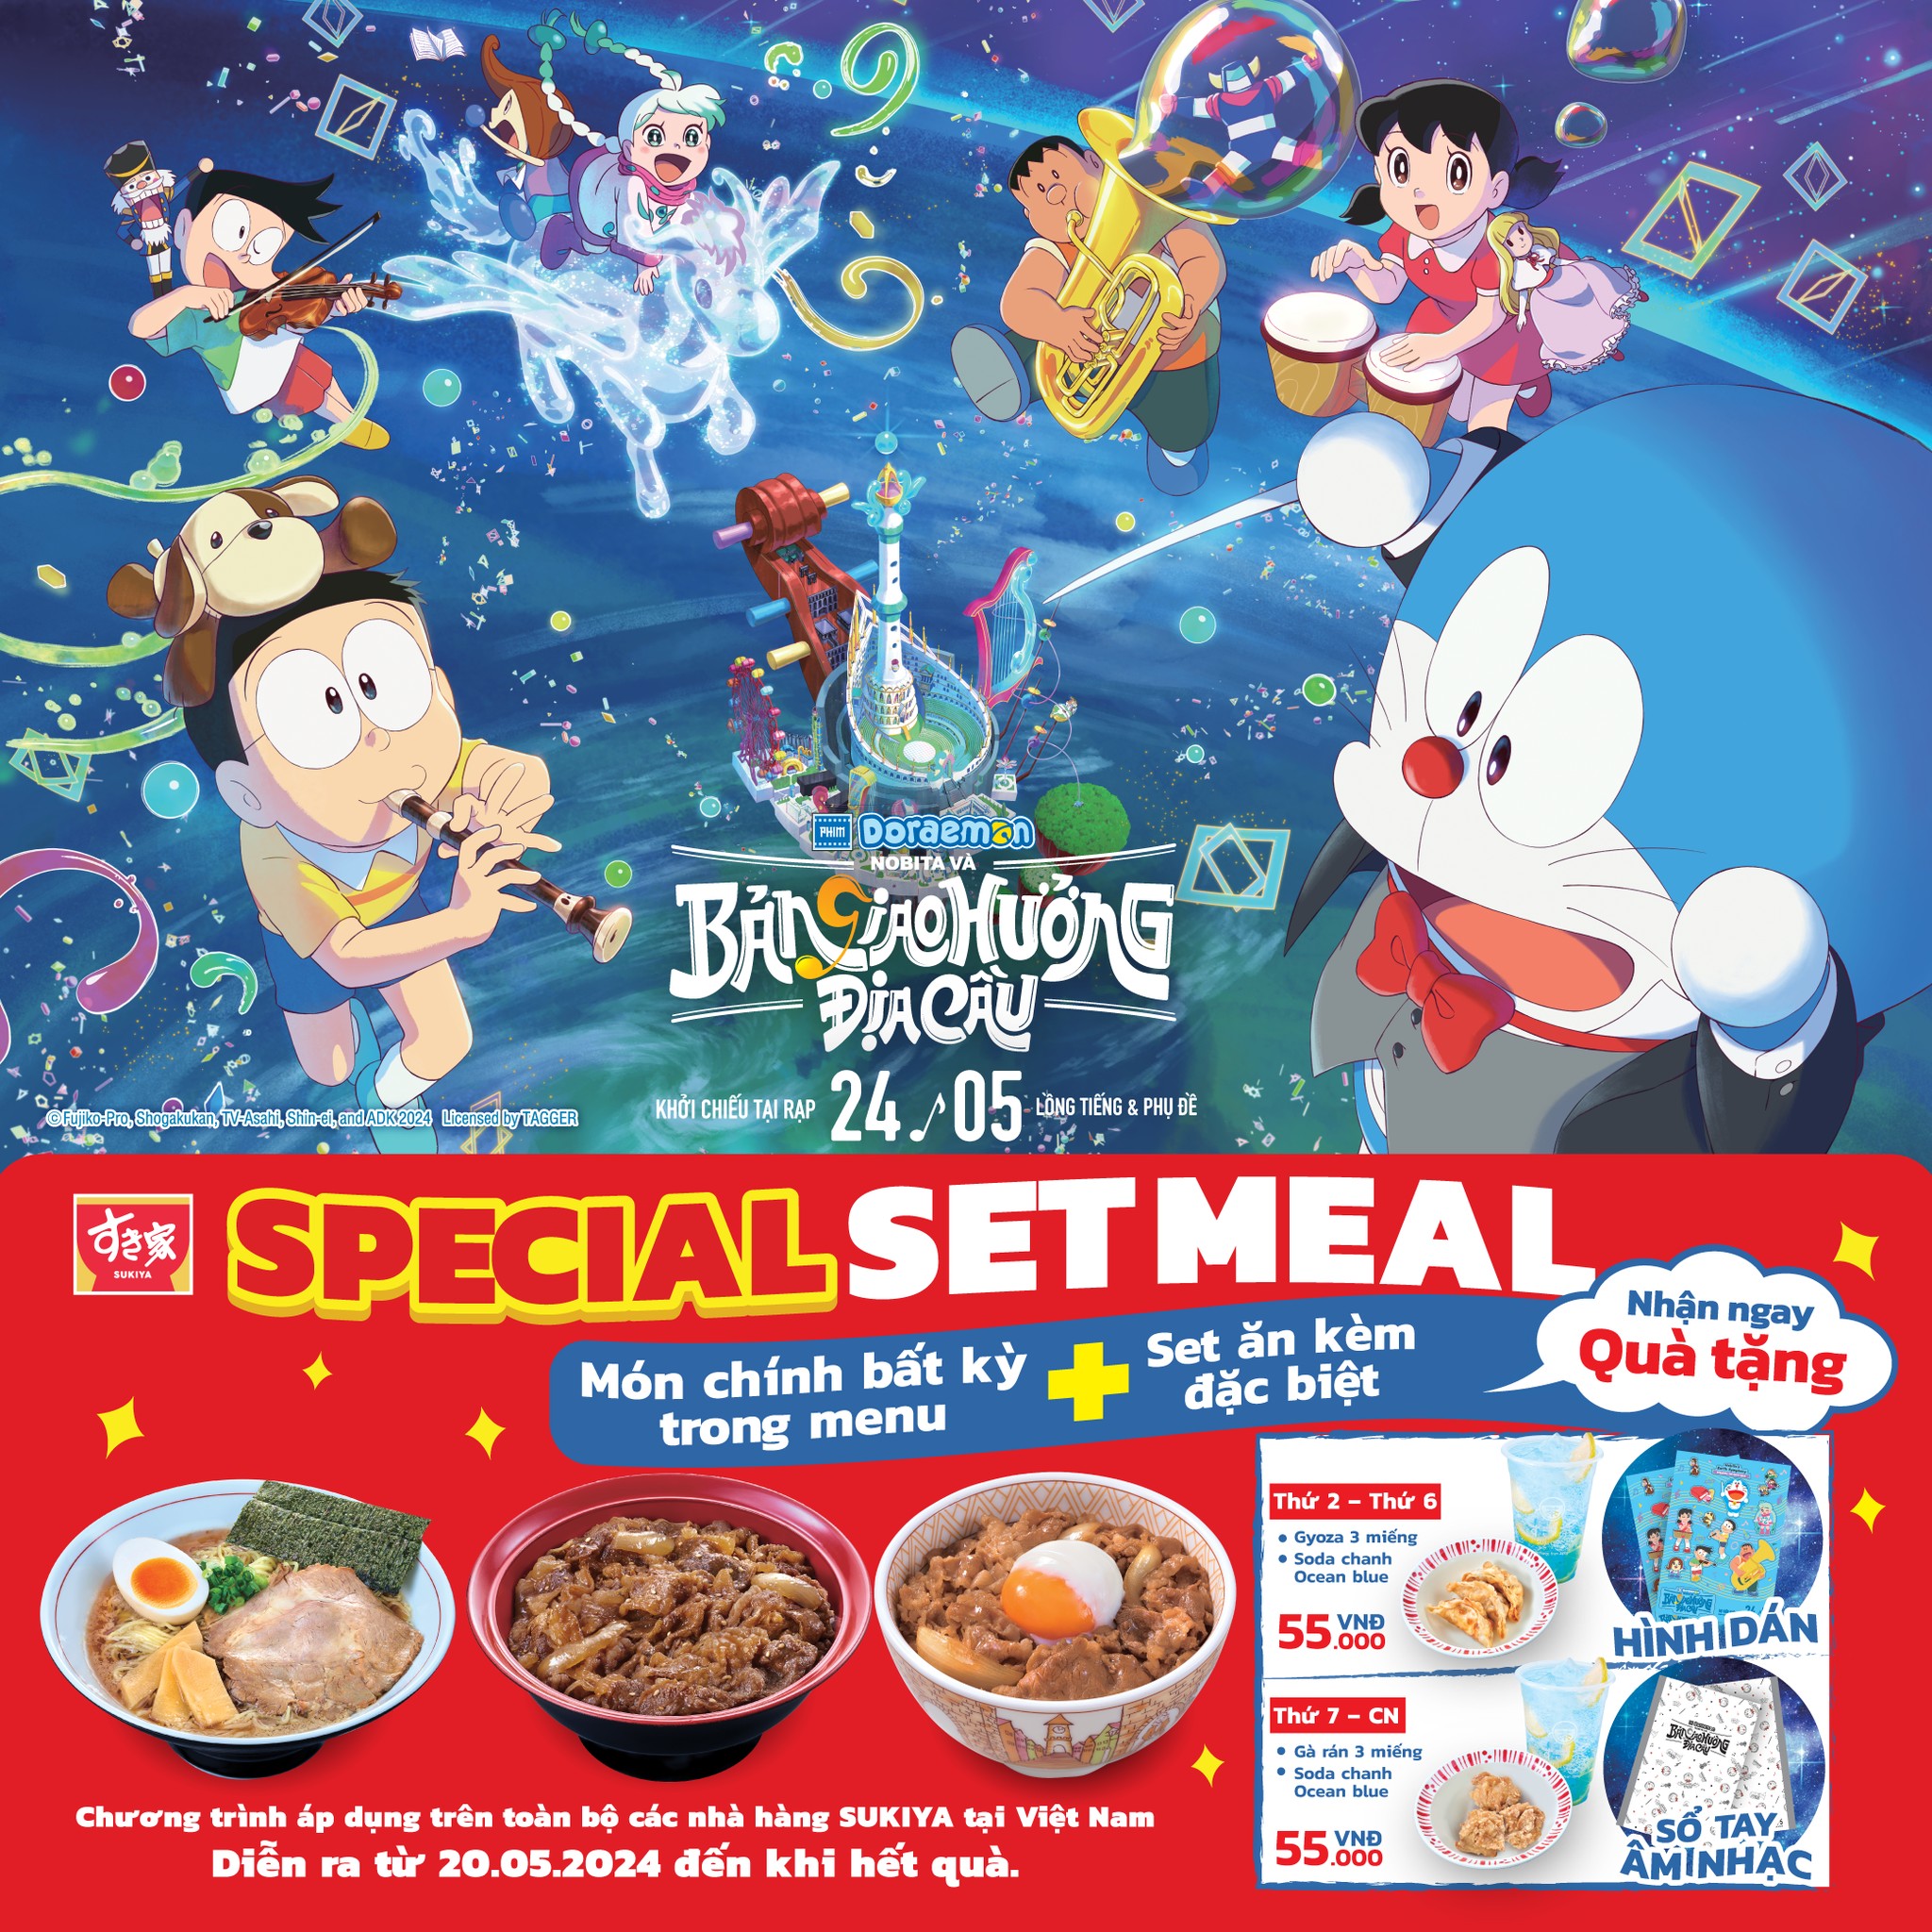 RA MẮT COMBO SPECIAL SET MEAL